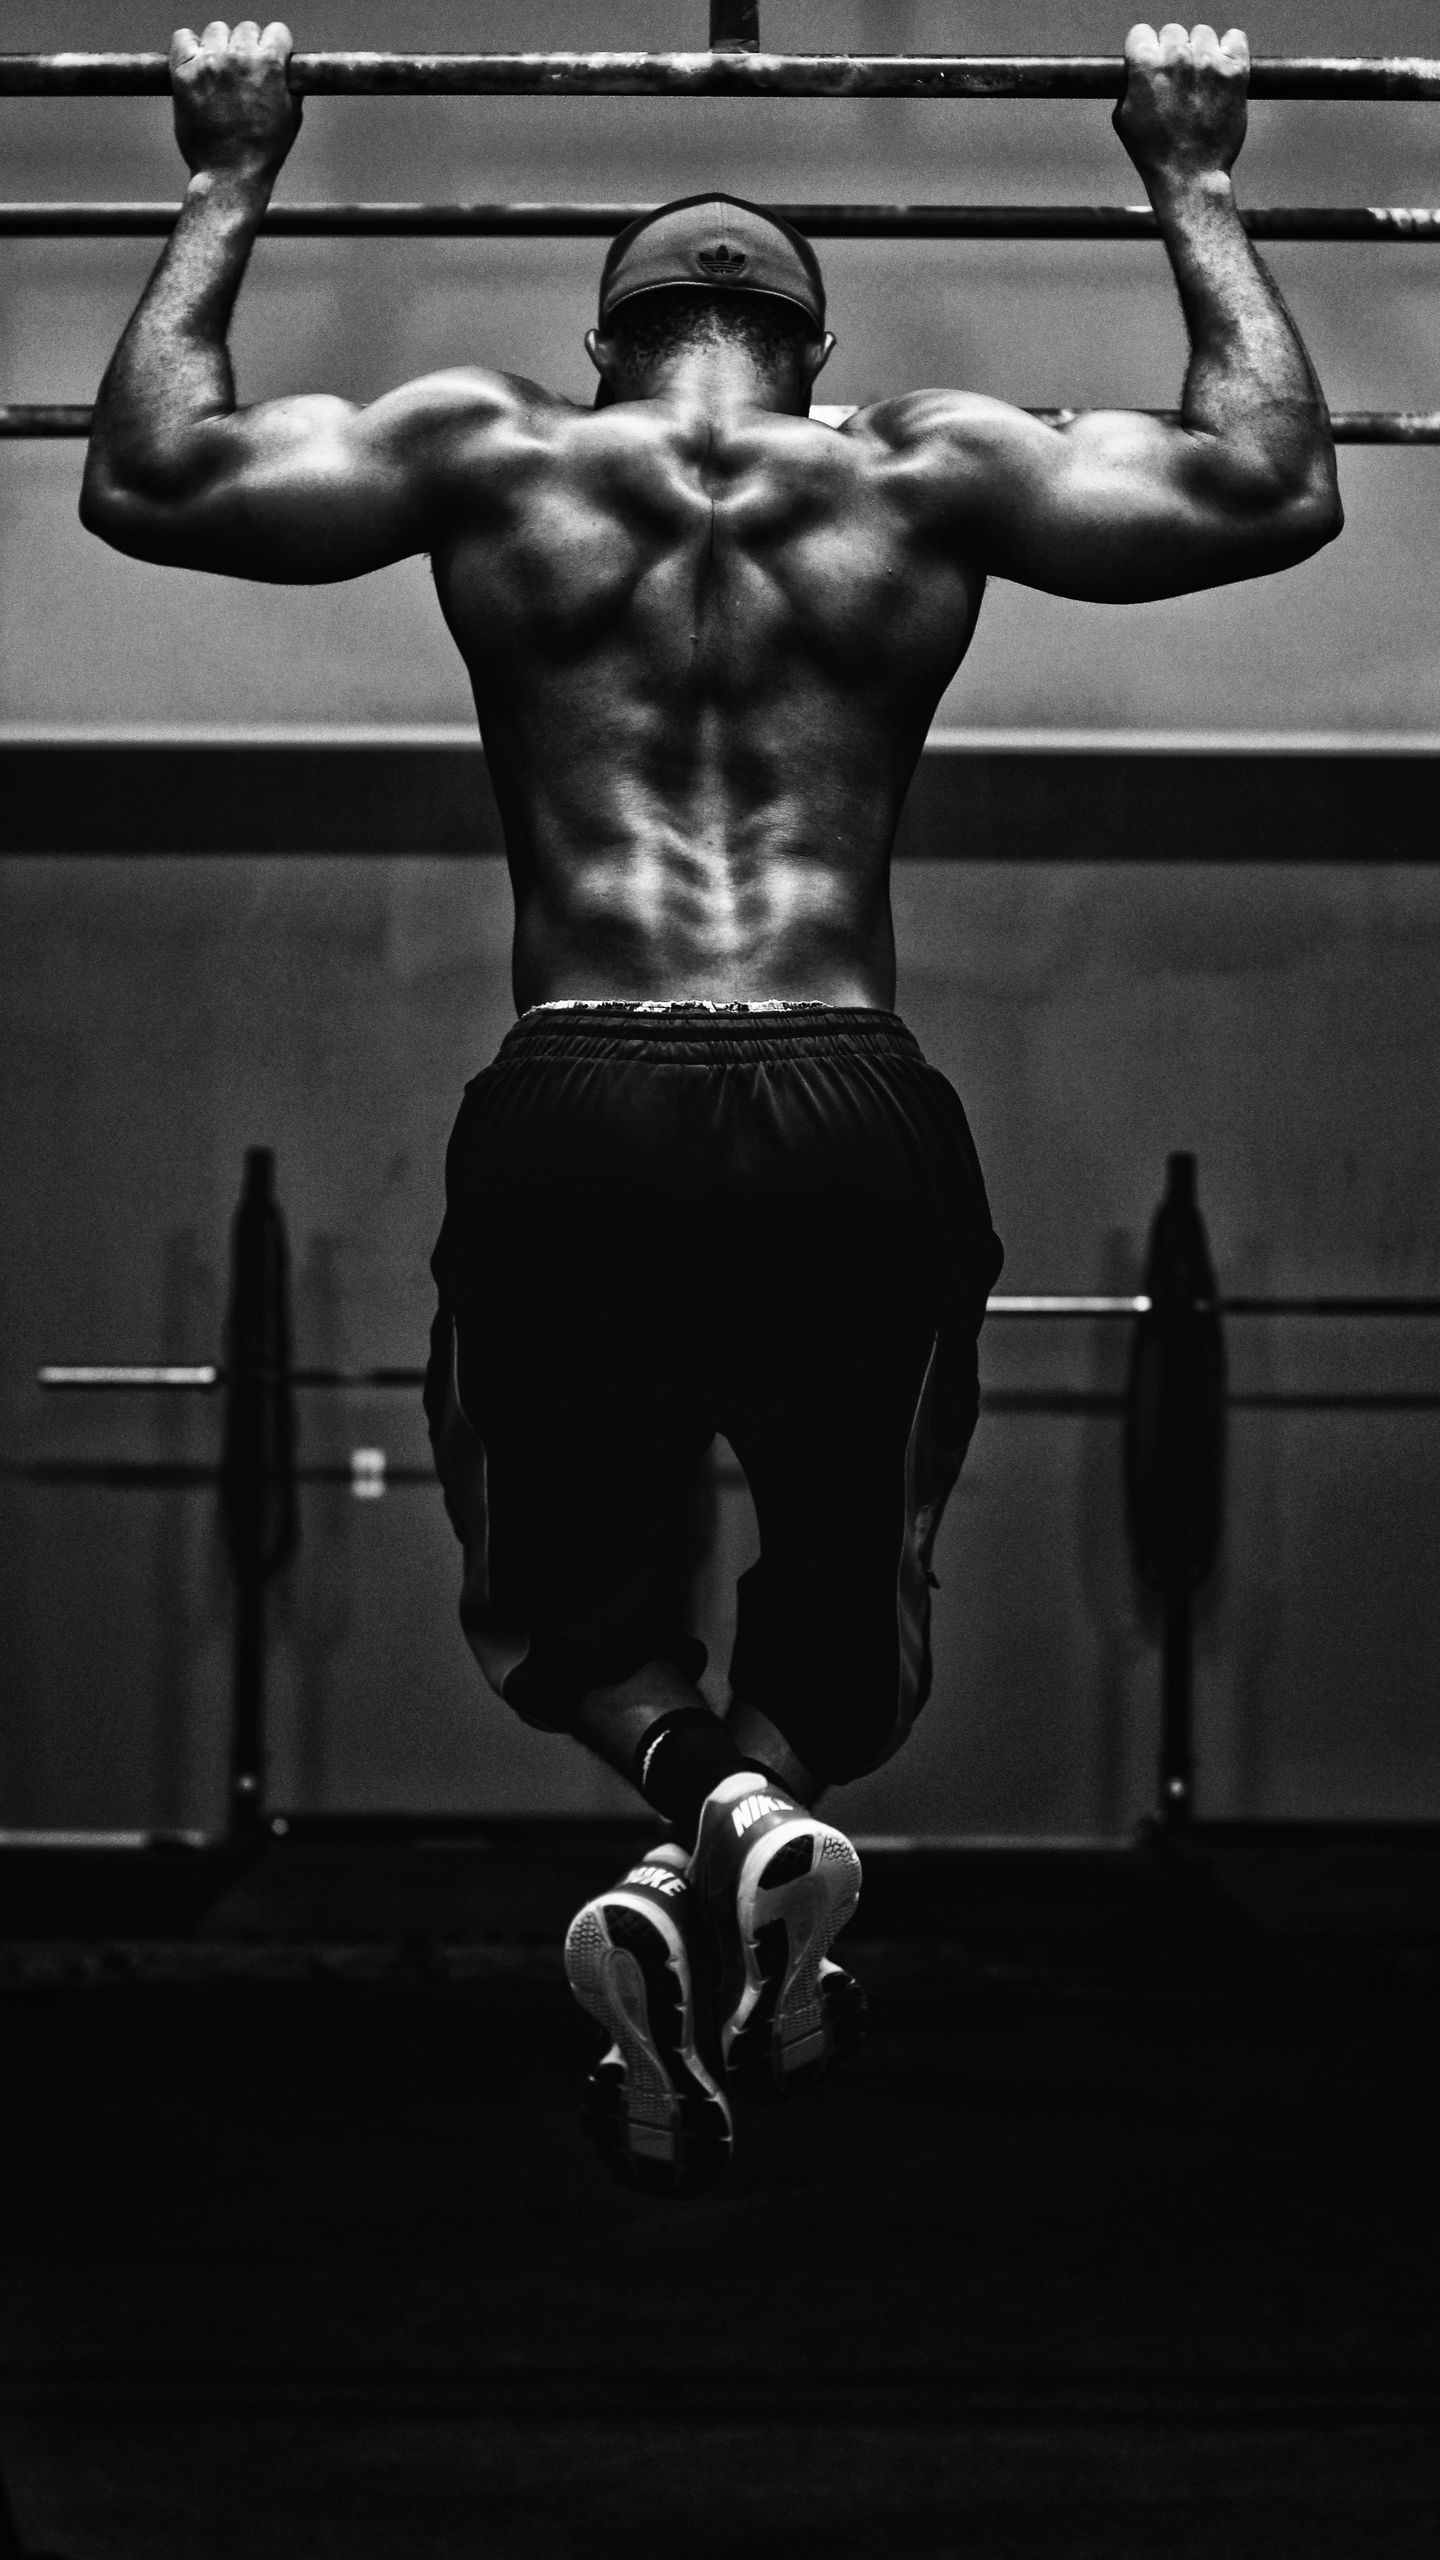 Download wallpaper 1440x2560 pull-ups, man, workout, bw, muscle, athlete,  horizontal bar qhd samsung galaxy s6, s7, edge, note, lg g4 hd background